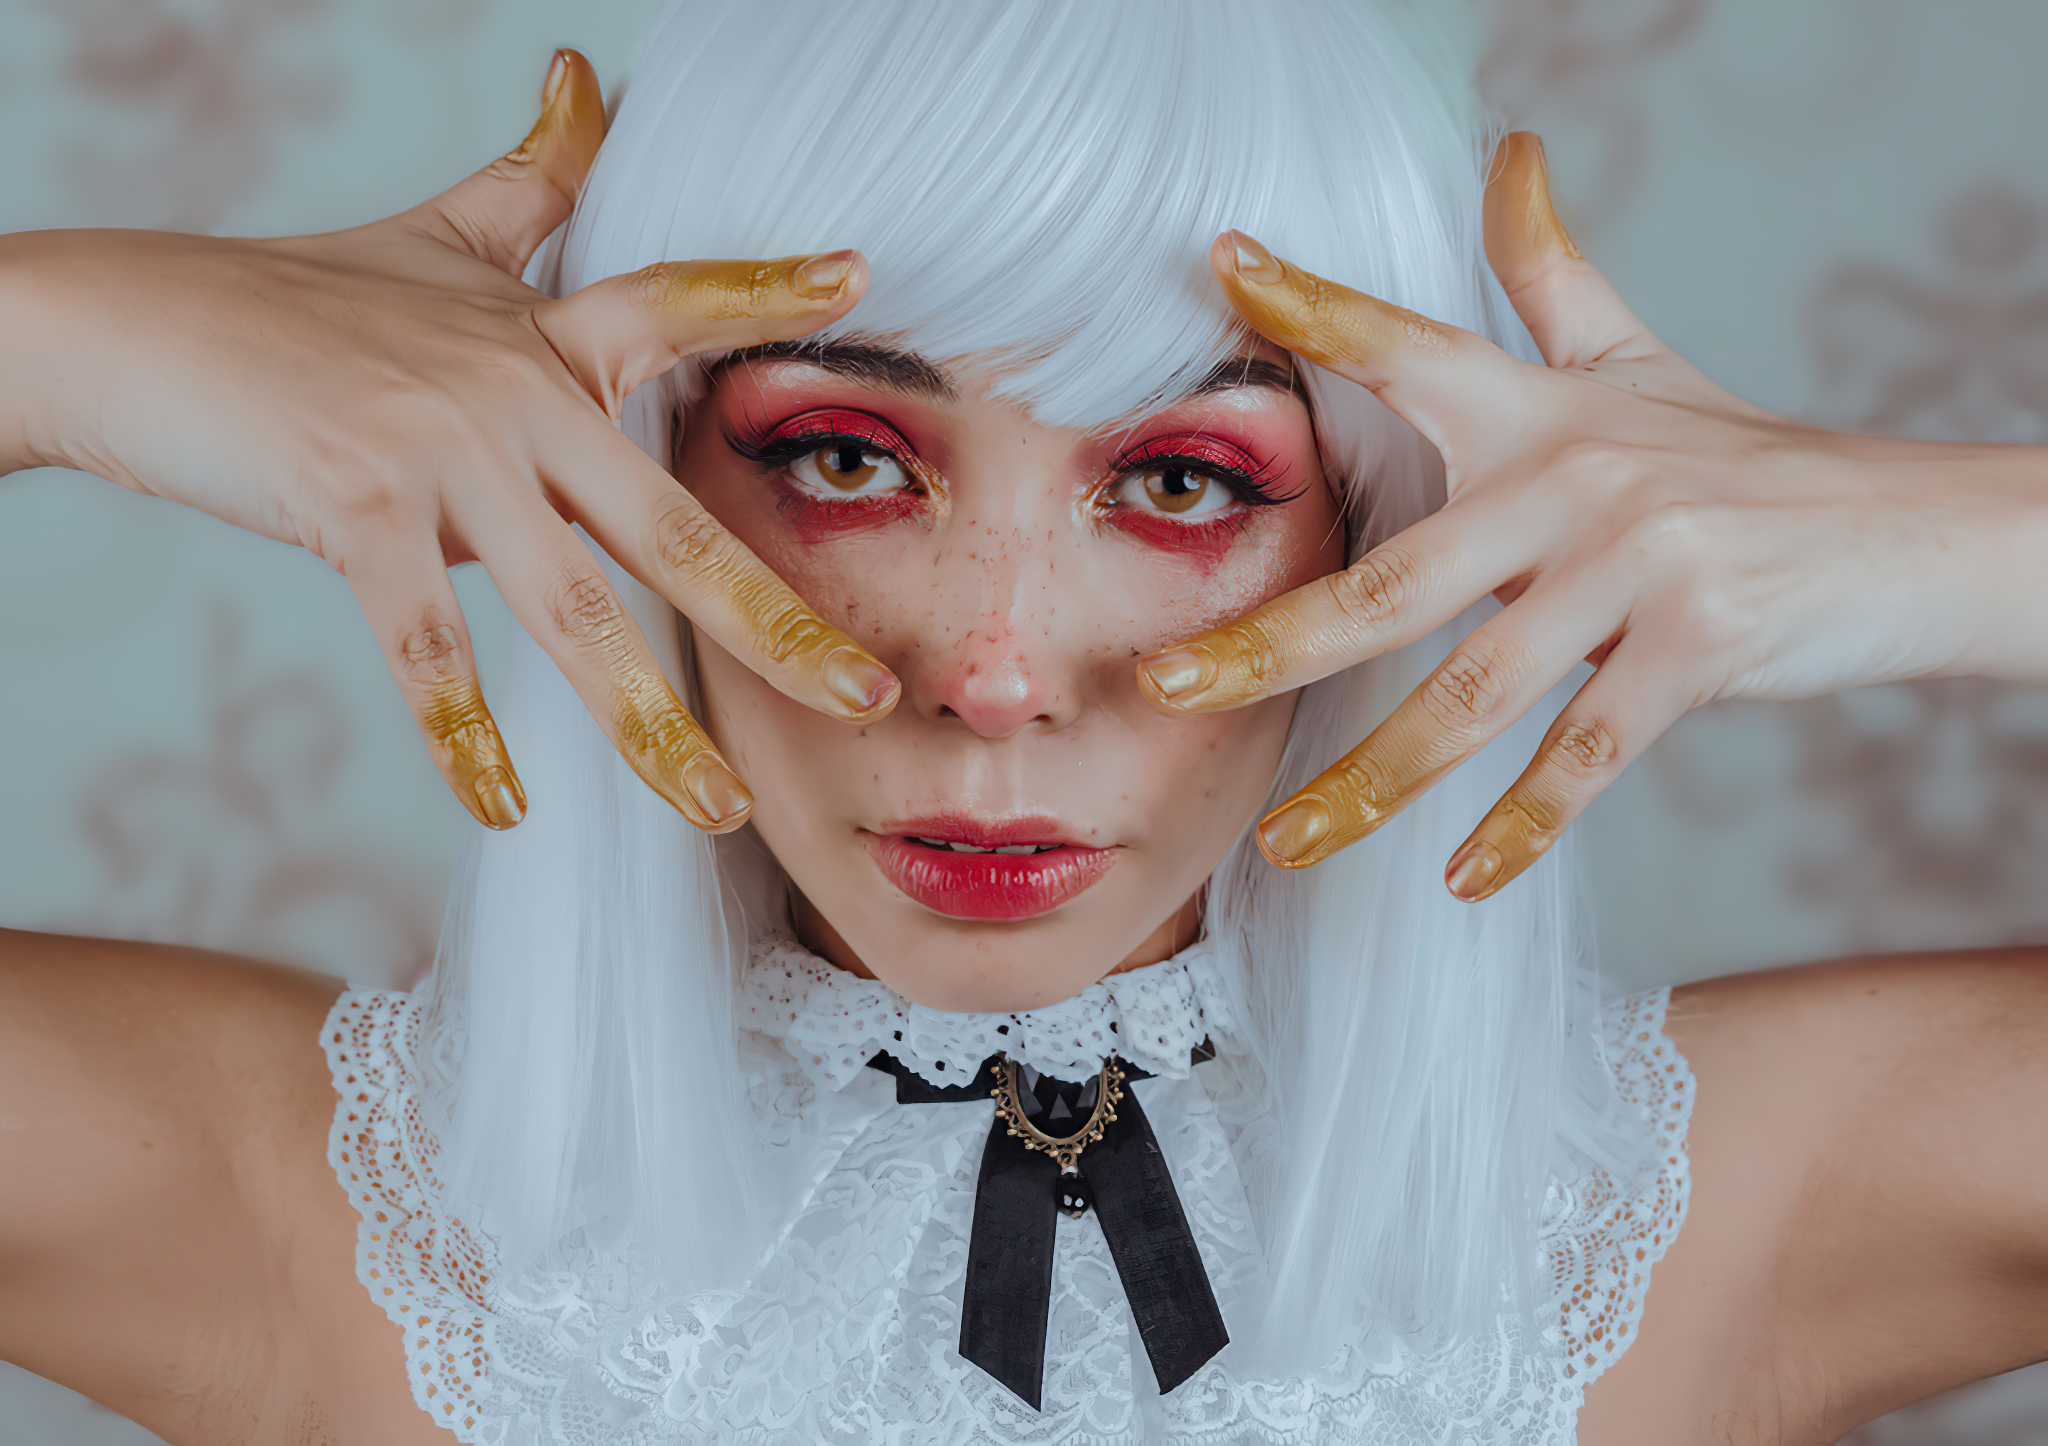 Women White Hair Smudged Makeup Makeup Emotions Portrait Photography Freckles Red Lipstick 2048x1446